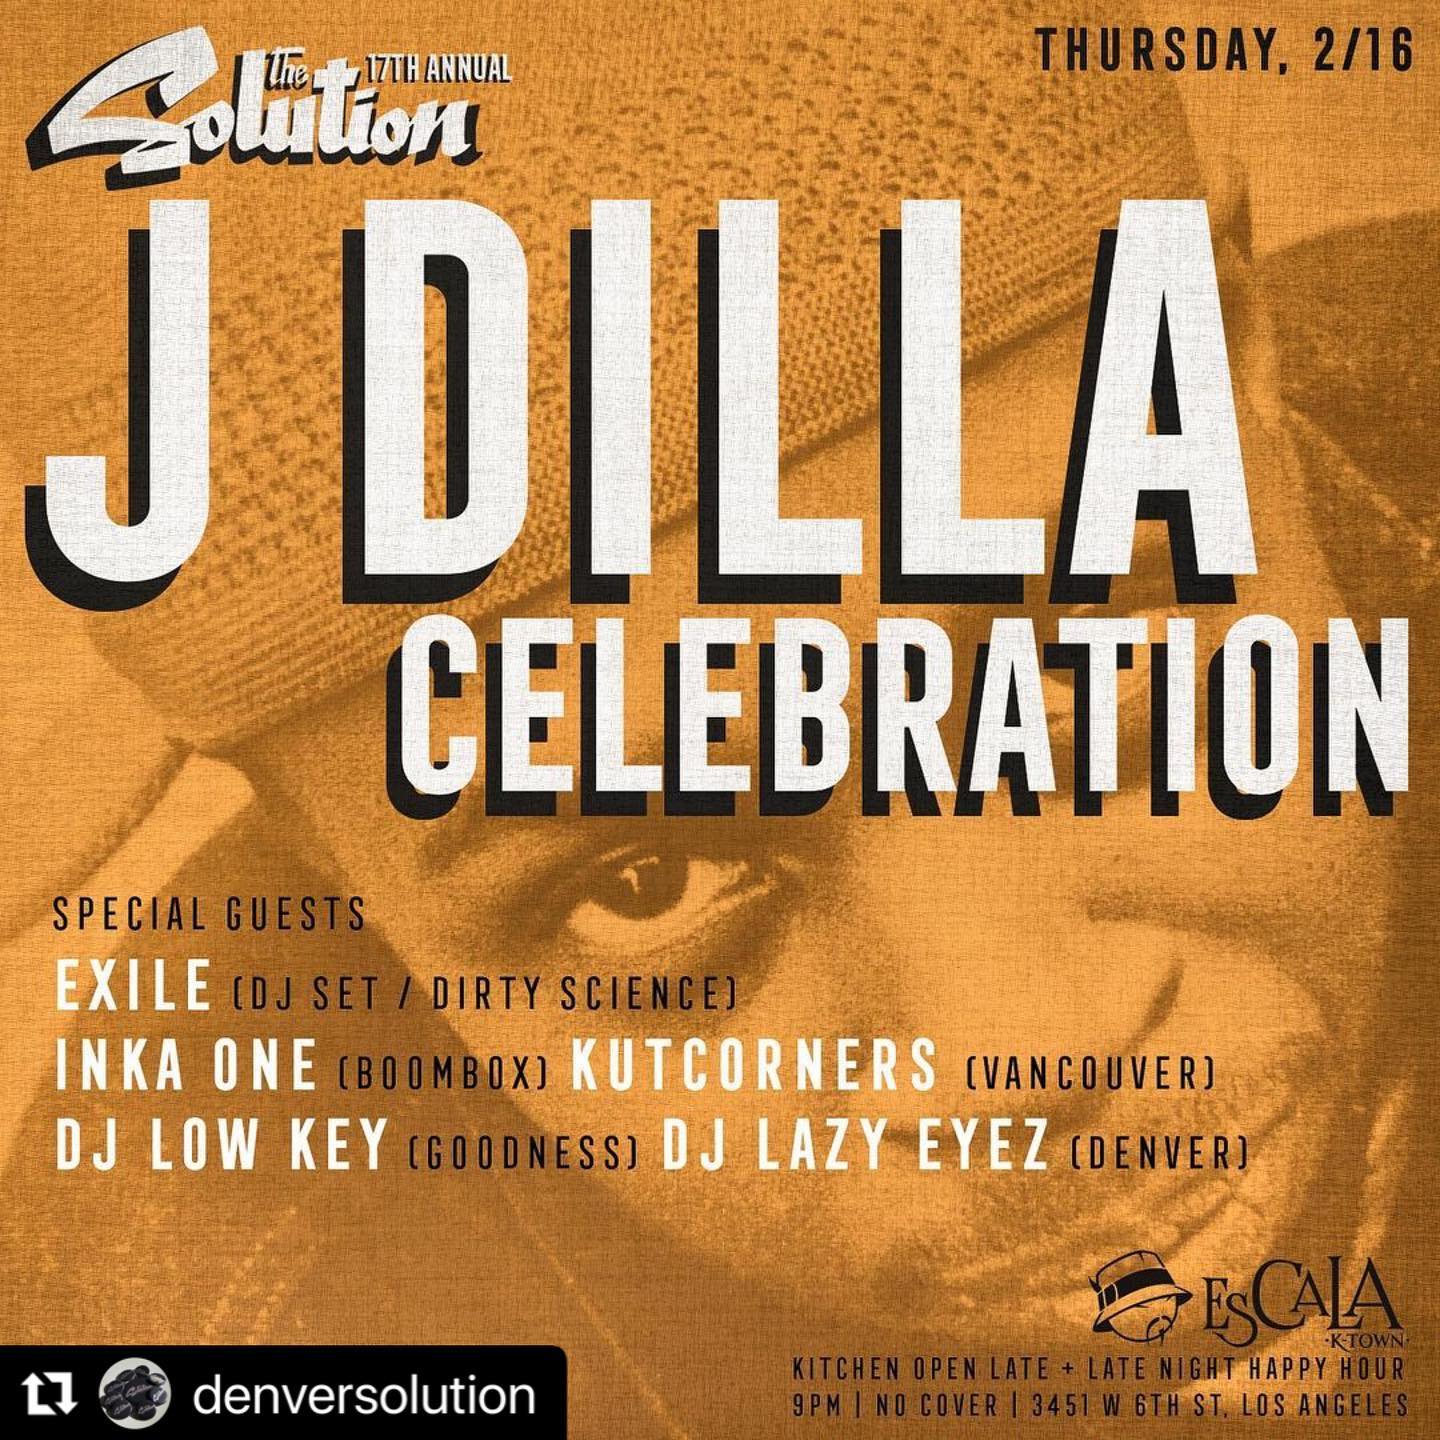 The Solution’s 17th Annual J Dilla Celebration at Escala Ktown on Thu